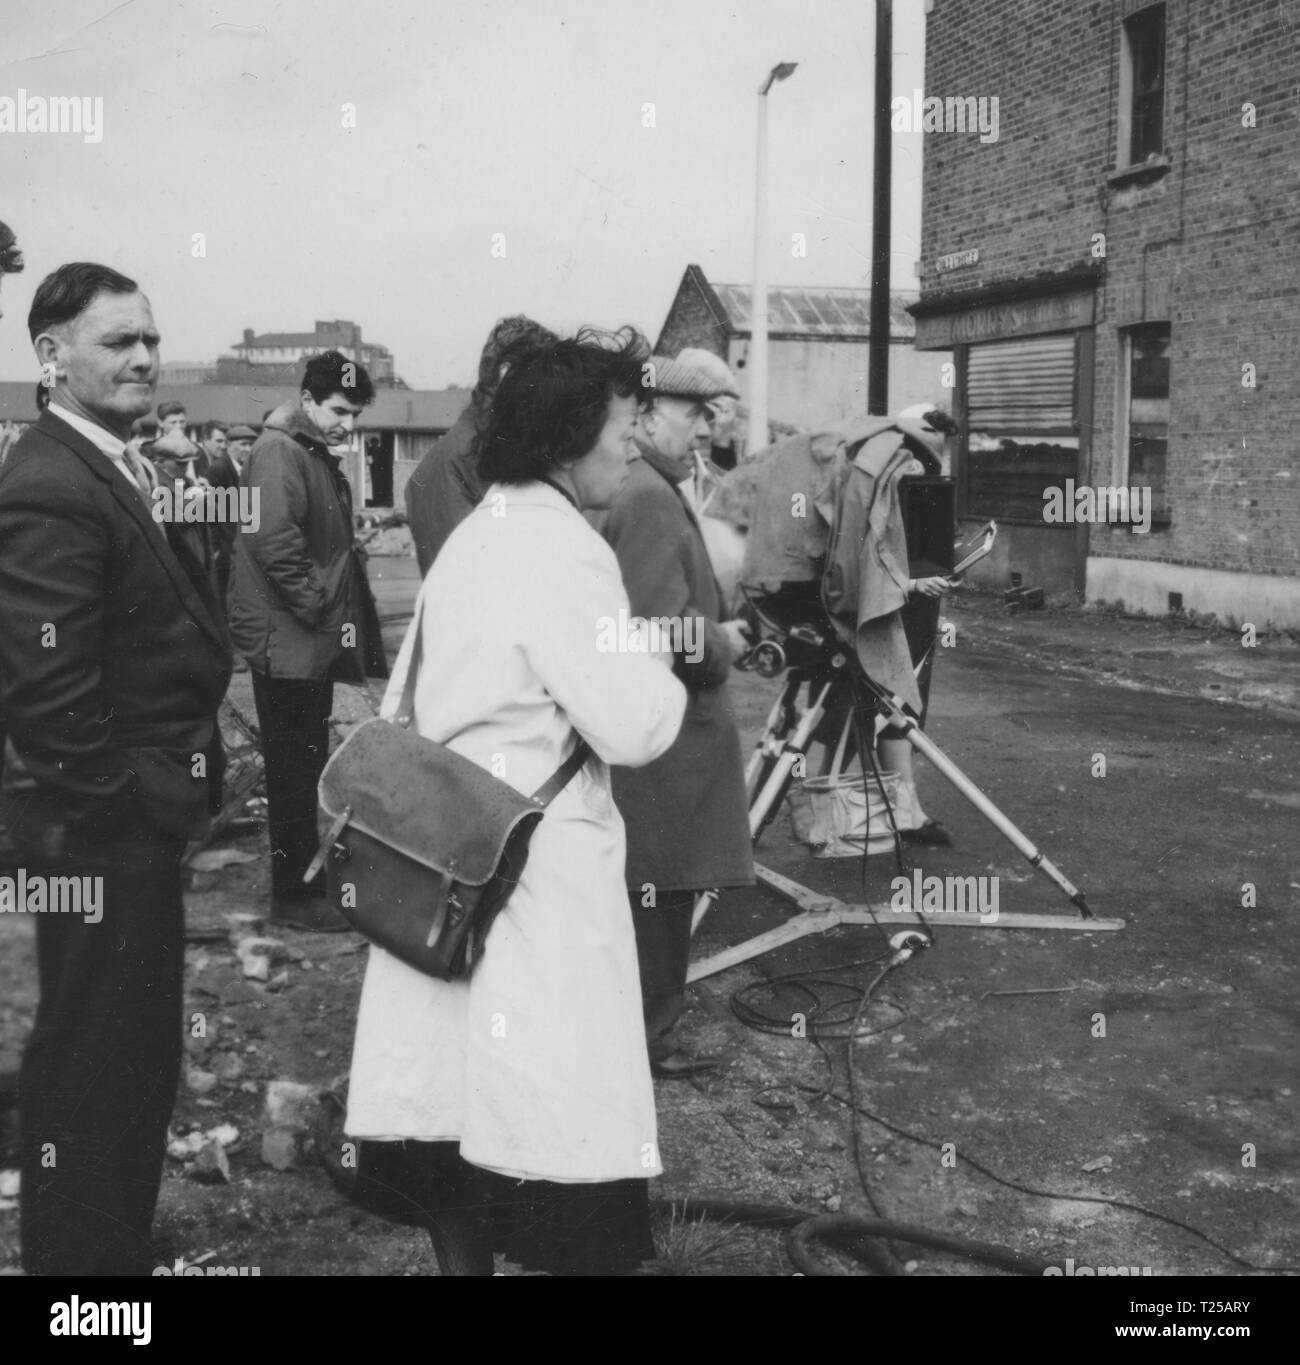 Sparrows Can't Sing (1962) Film Director Joan Littlewood, Date: 1962 ...